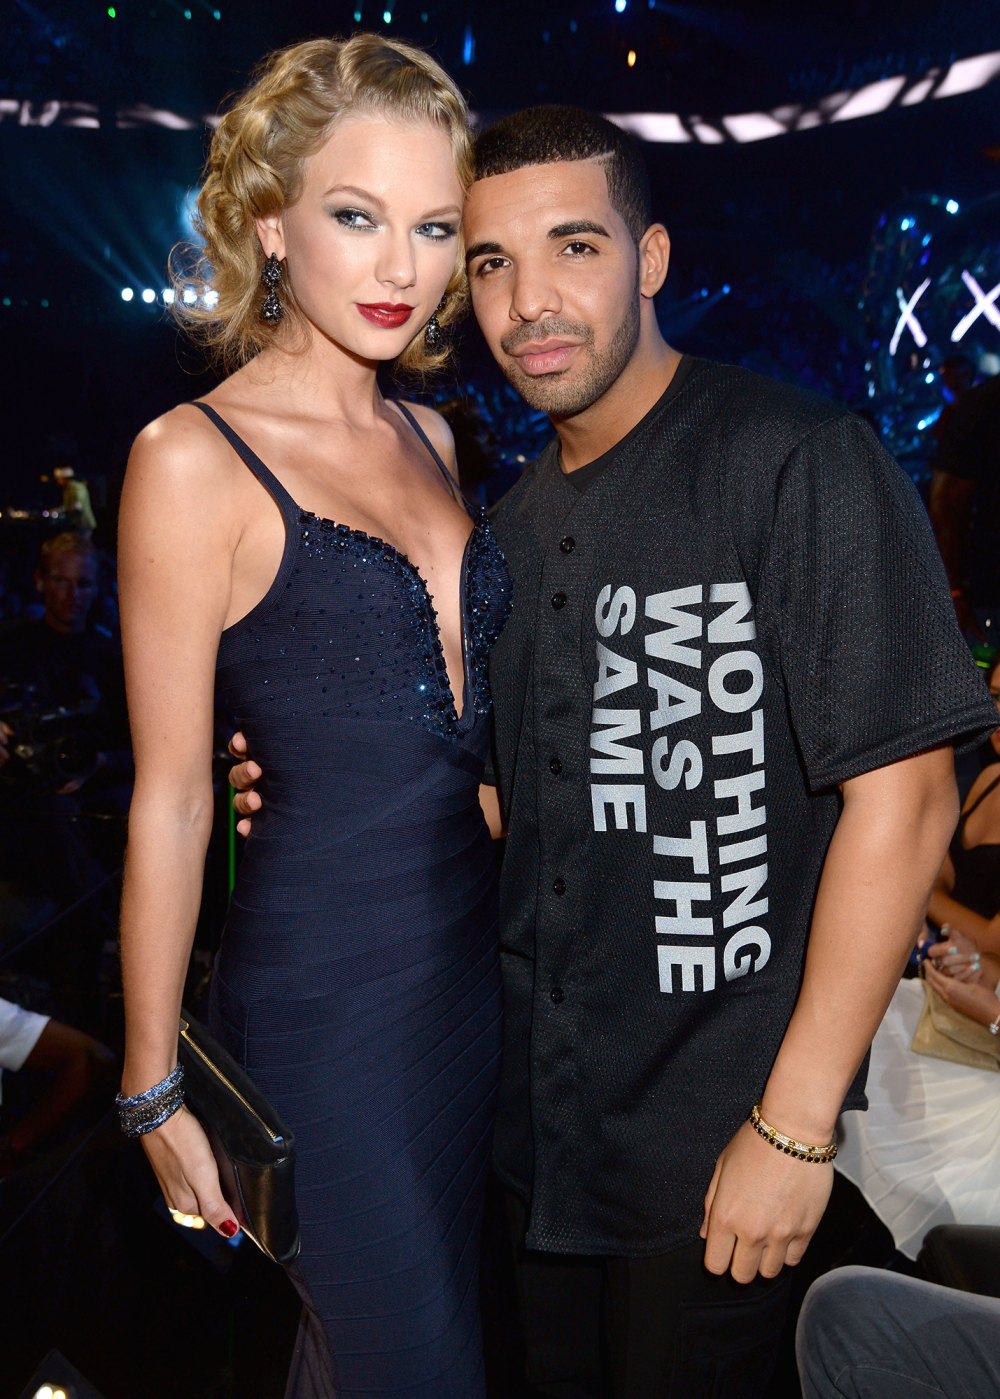 Drake Explains Why He Pushed Album Release Date While Giving Taylor Swift a Shout Out